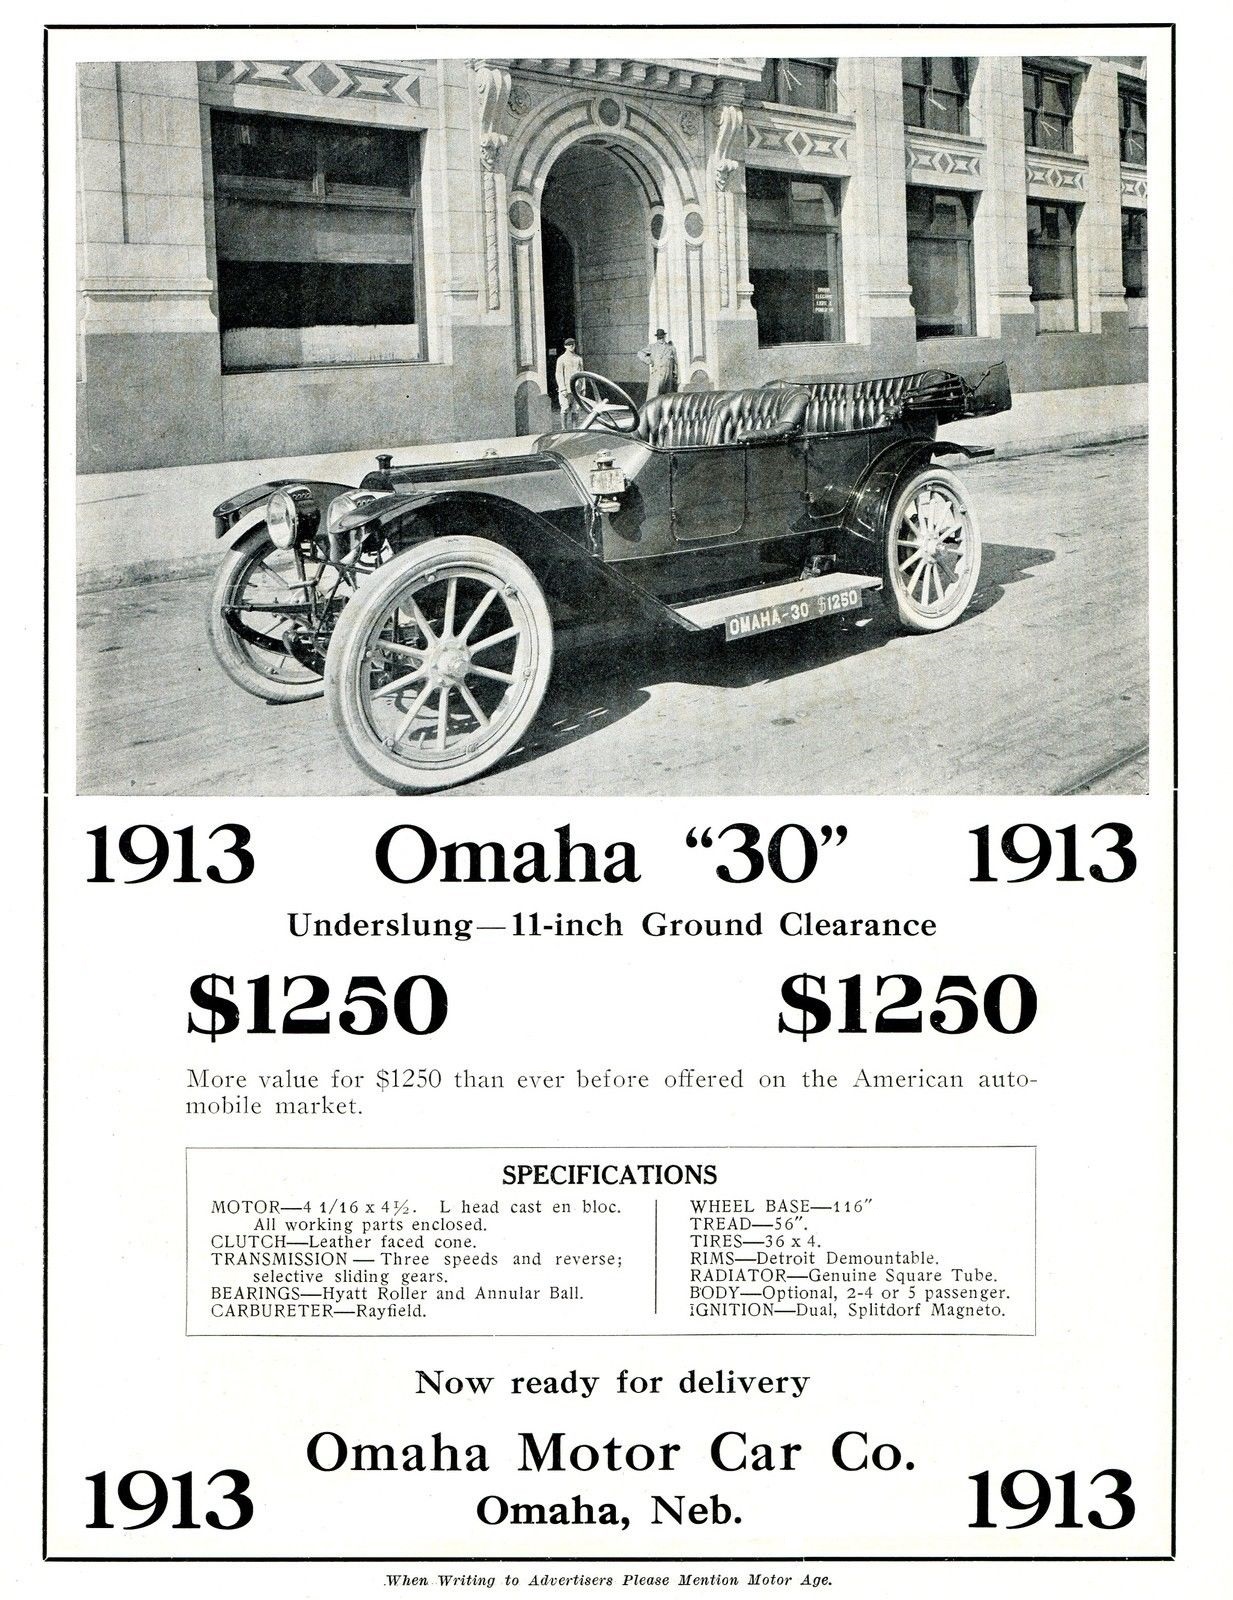 The Omaha Motor Company factory was in the Saratoga neighborhood at 4311 Florence Boulevard.